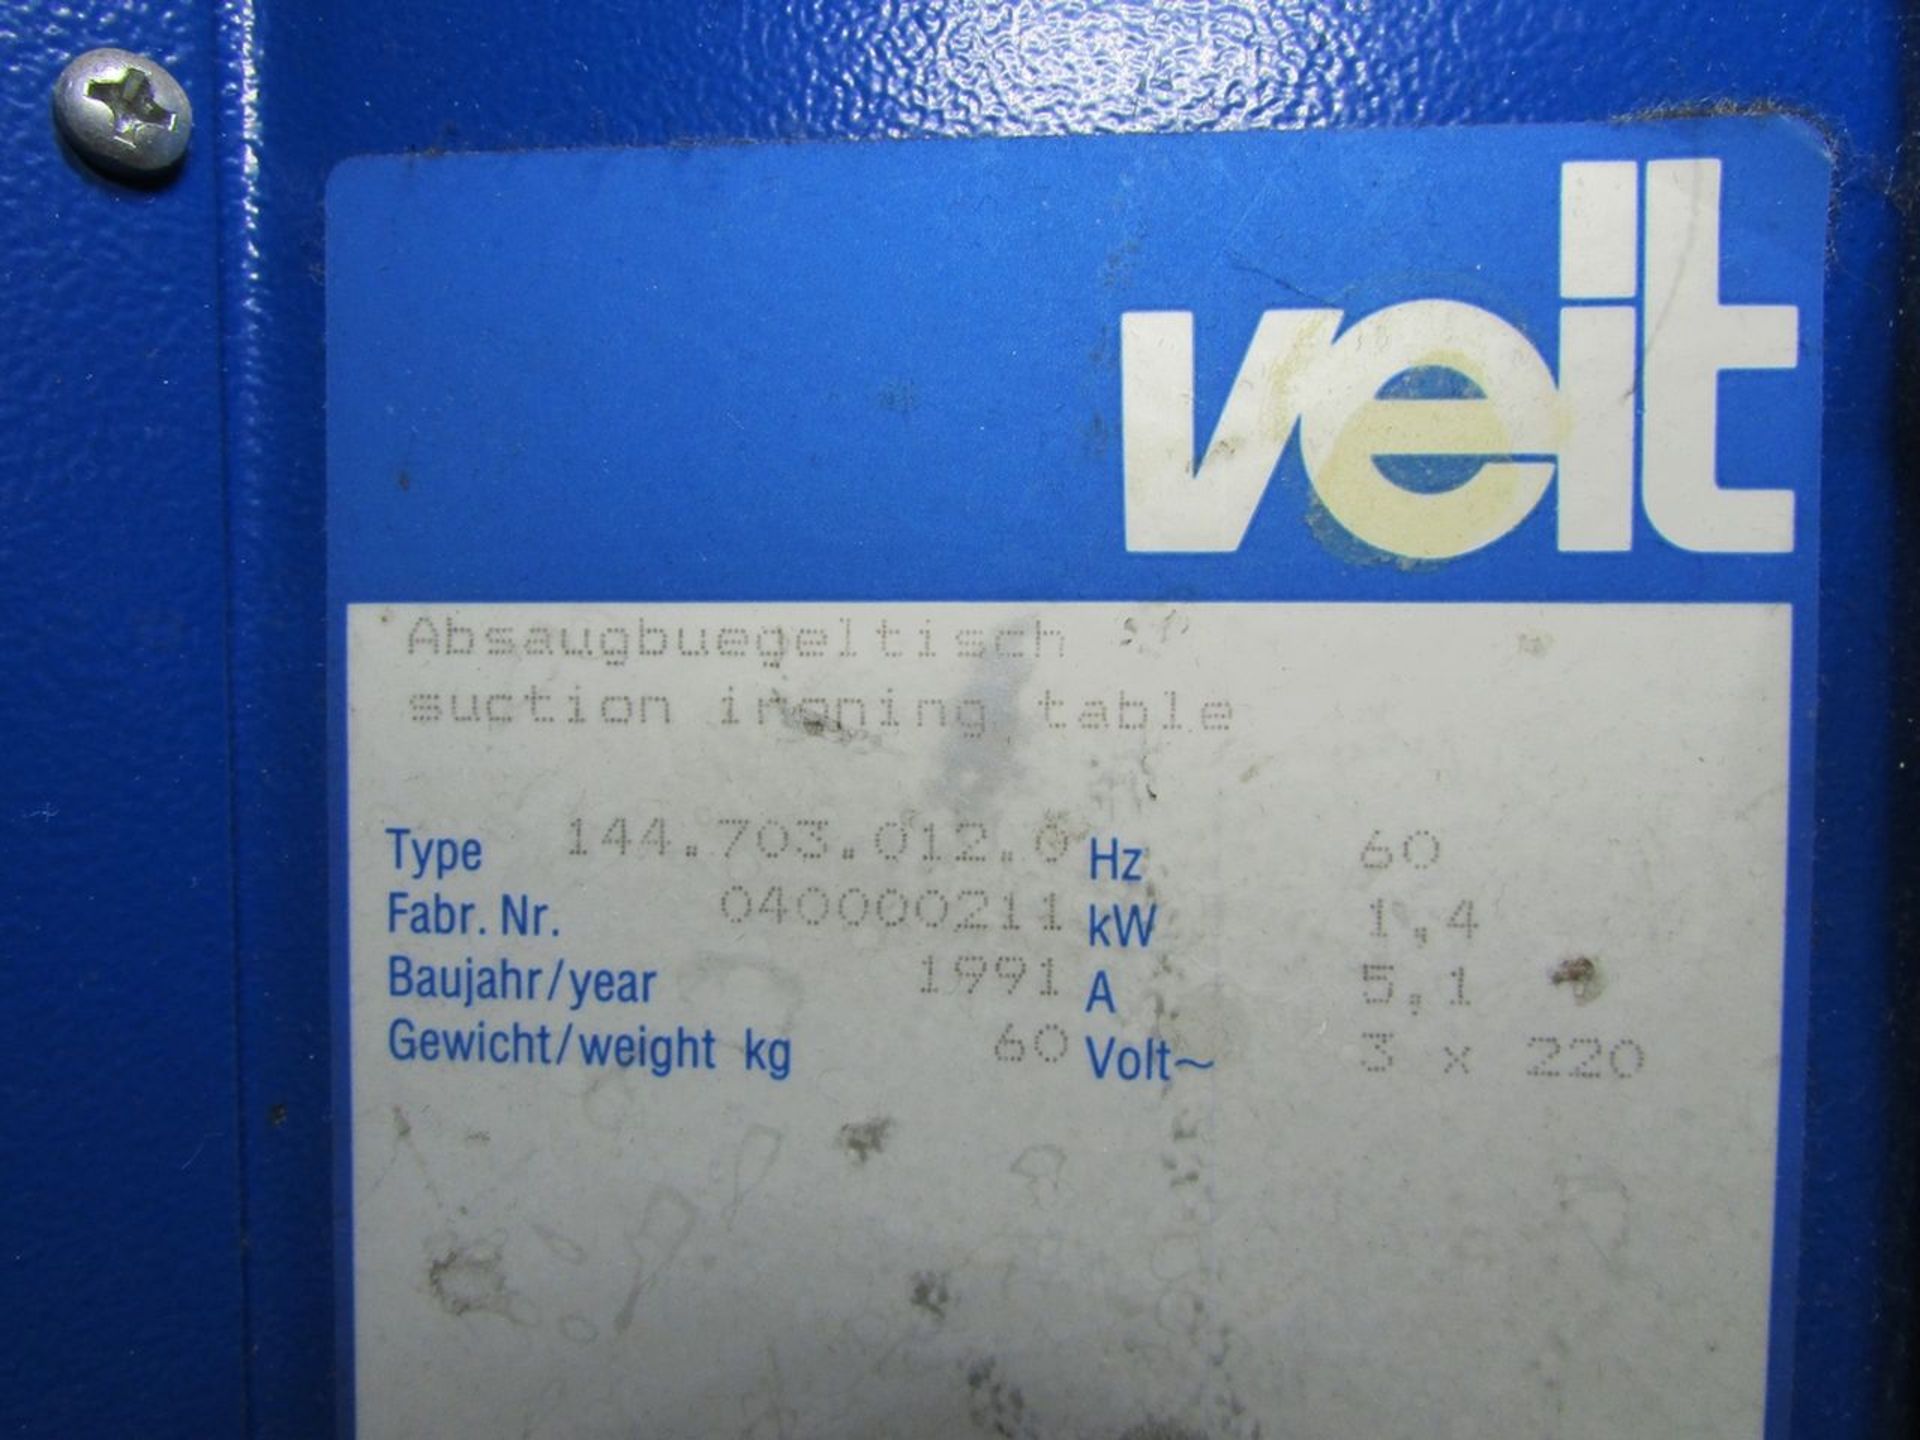 Veit Model 144.703.012.0 (S/N: 40000211) (1991) Touch-Up Table with Iron Board, Iron and Brisay - Image 8 of 8